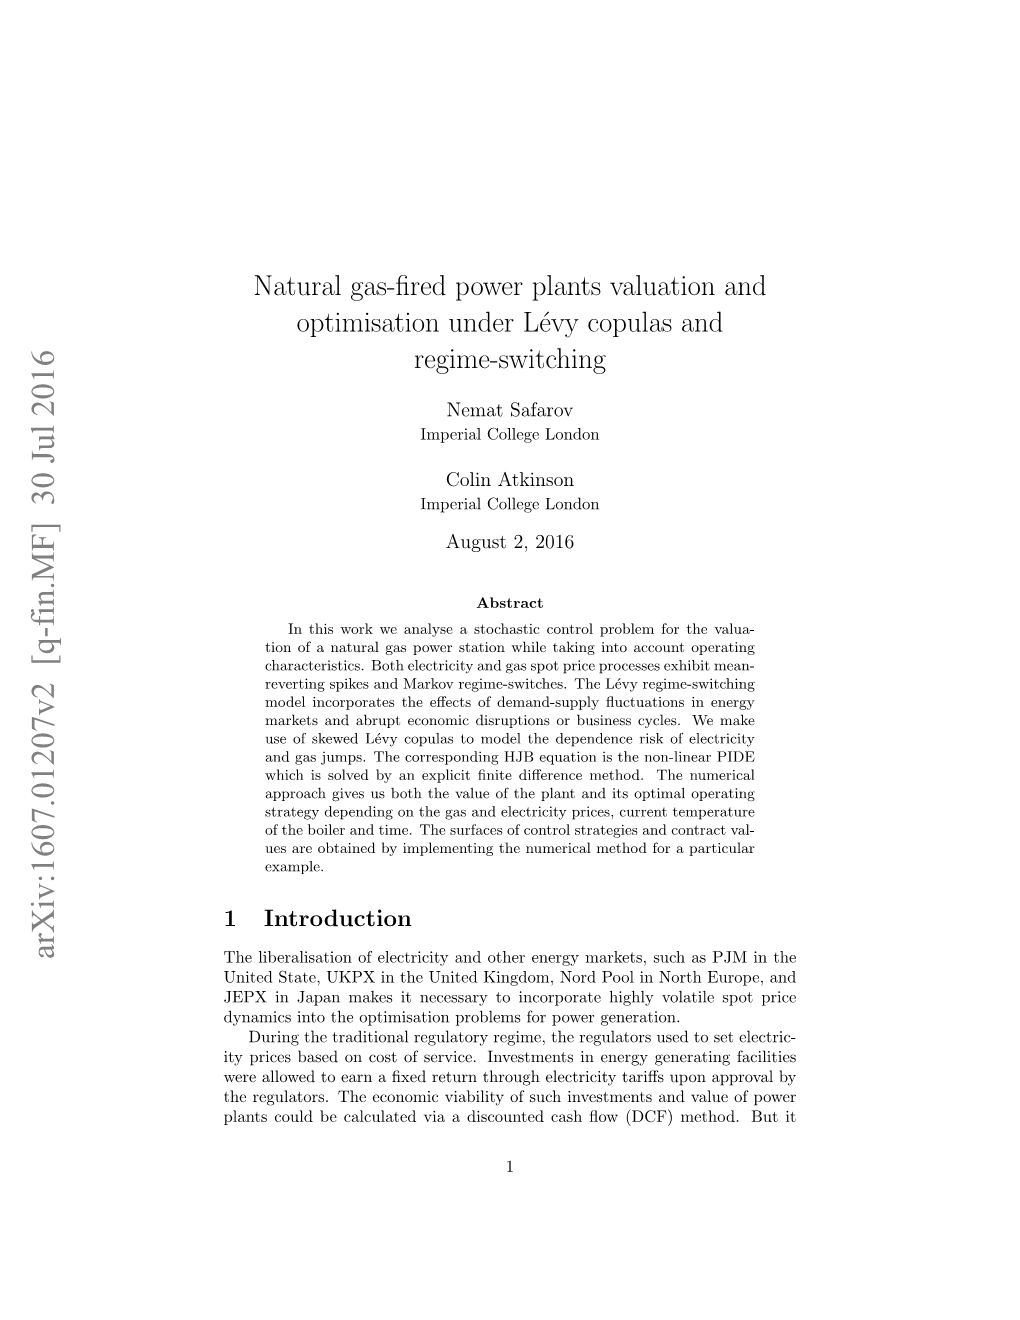 Natural Gas-Fired Power Plants Valuation and Optimisation Under Lévy Copulas and Regime-Switching